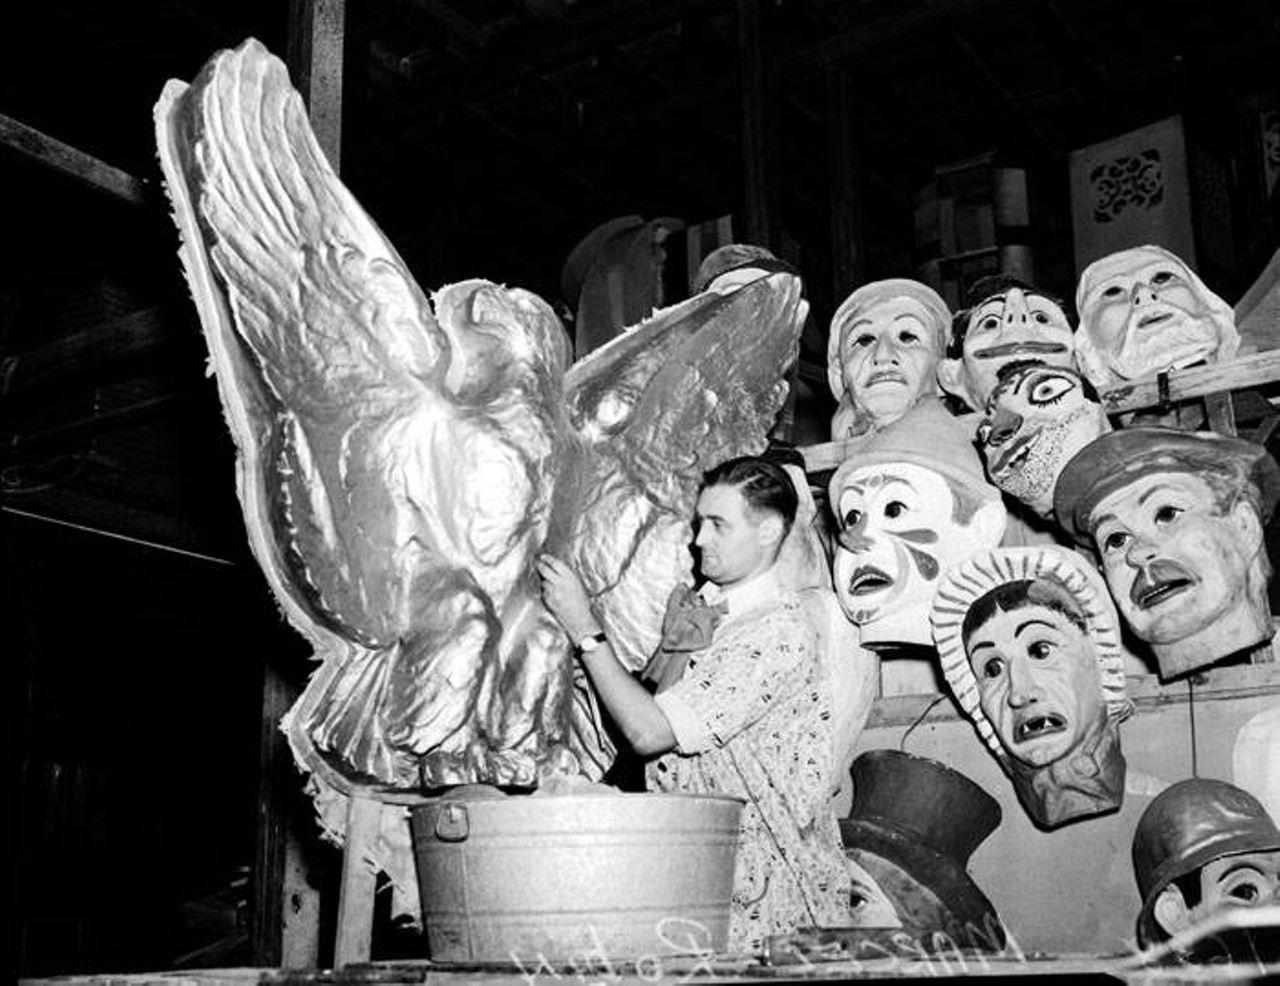 Marcel Robin Working on a Parade Float
Marcel could probably feel the judgy looks behind him as he was constructing this float.